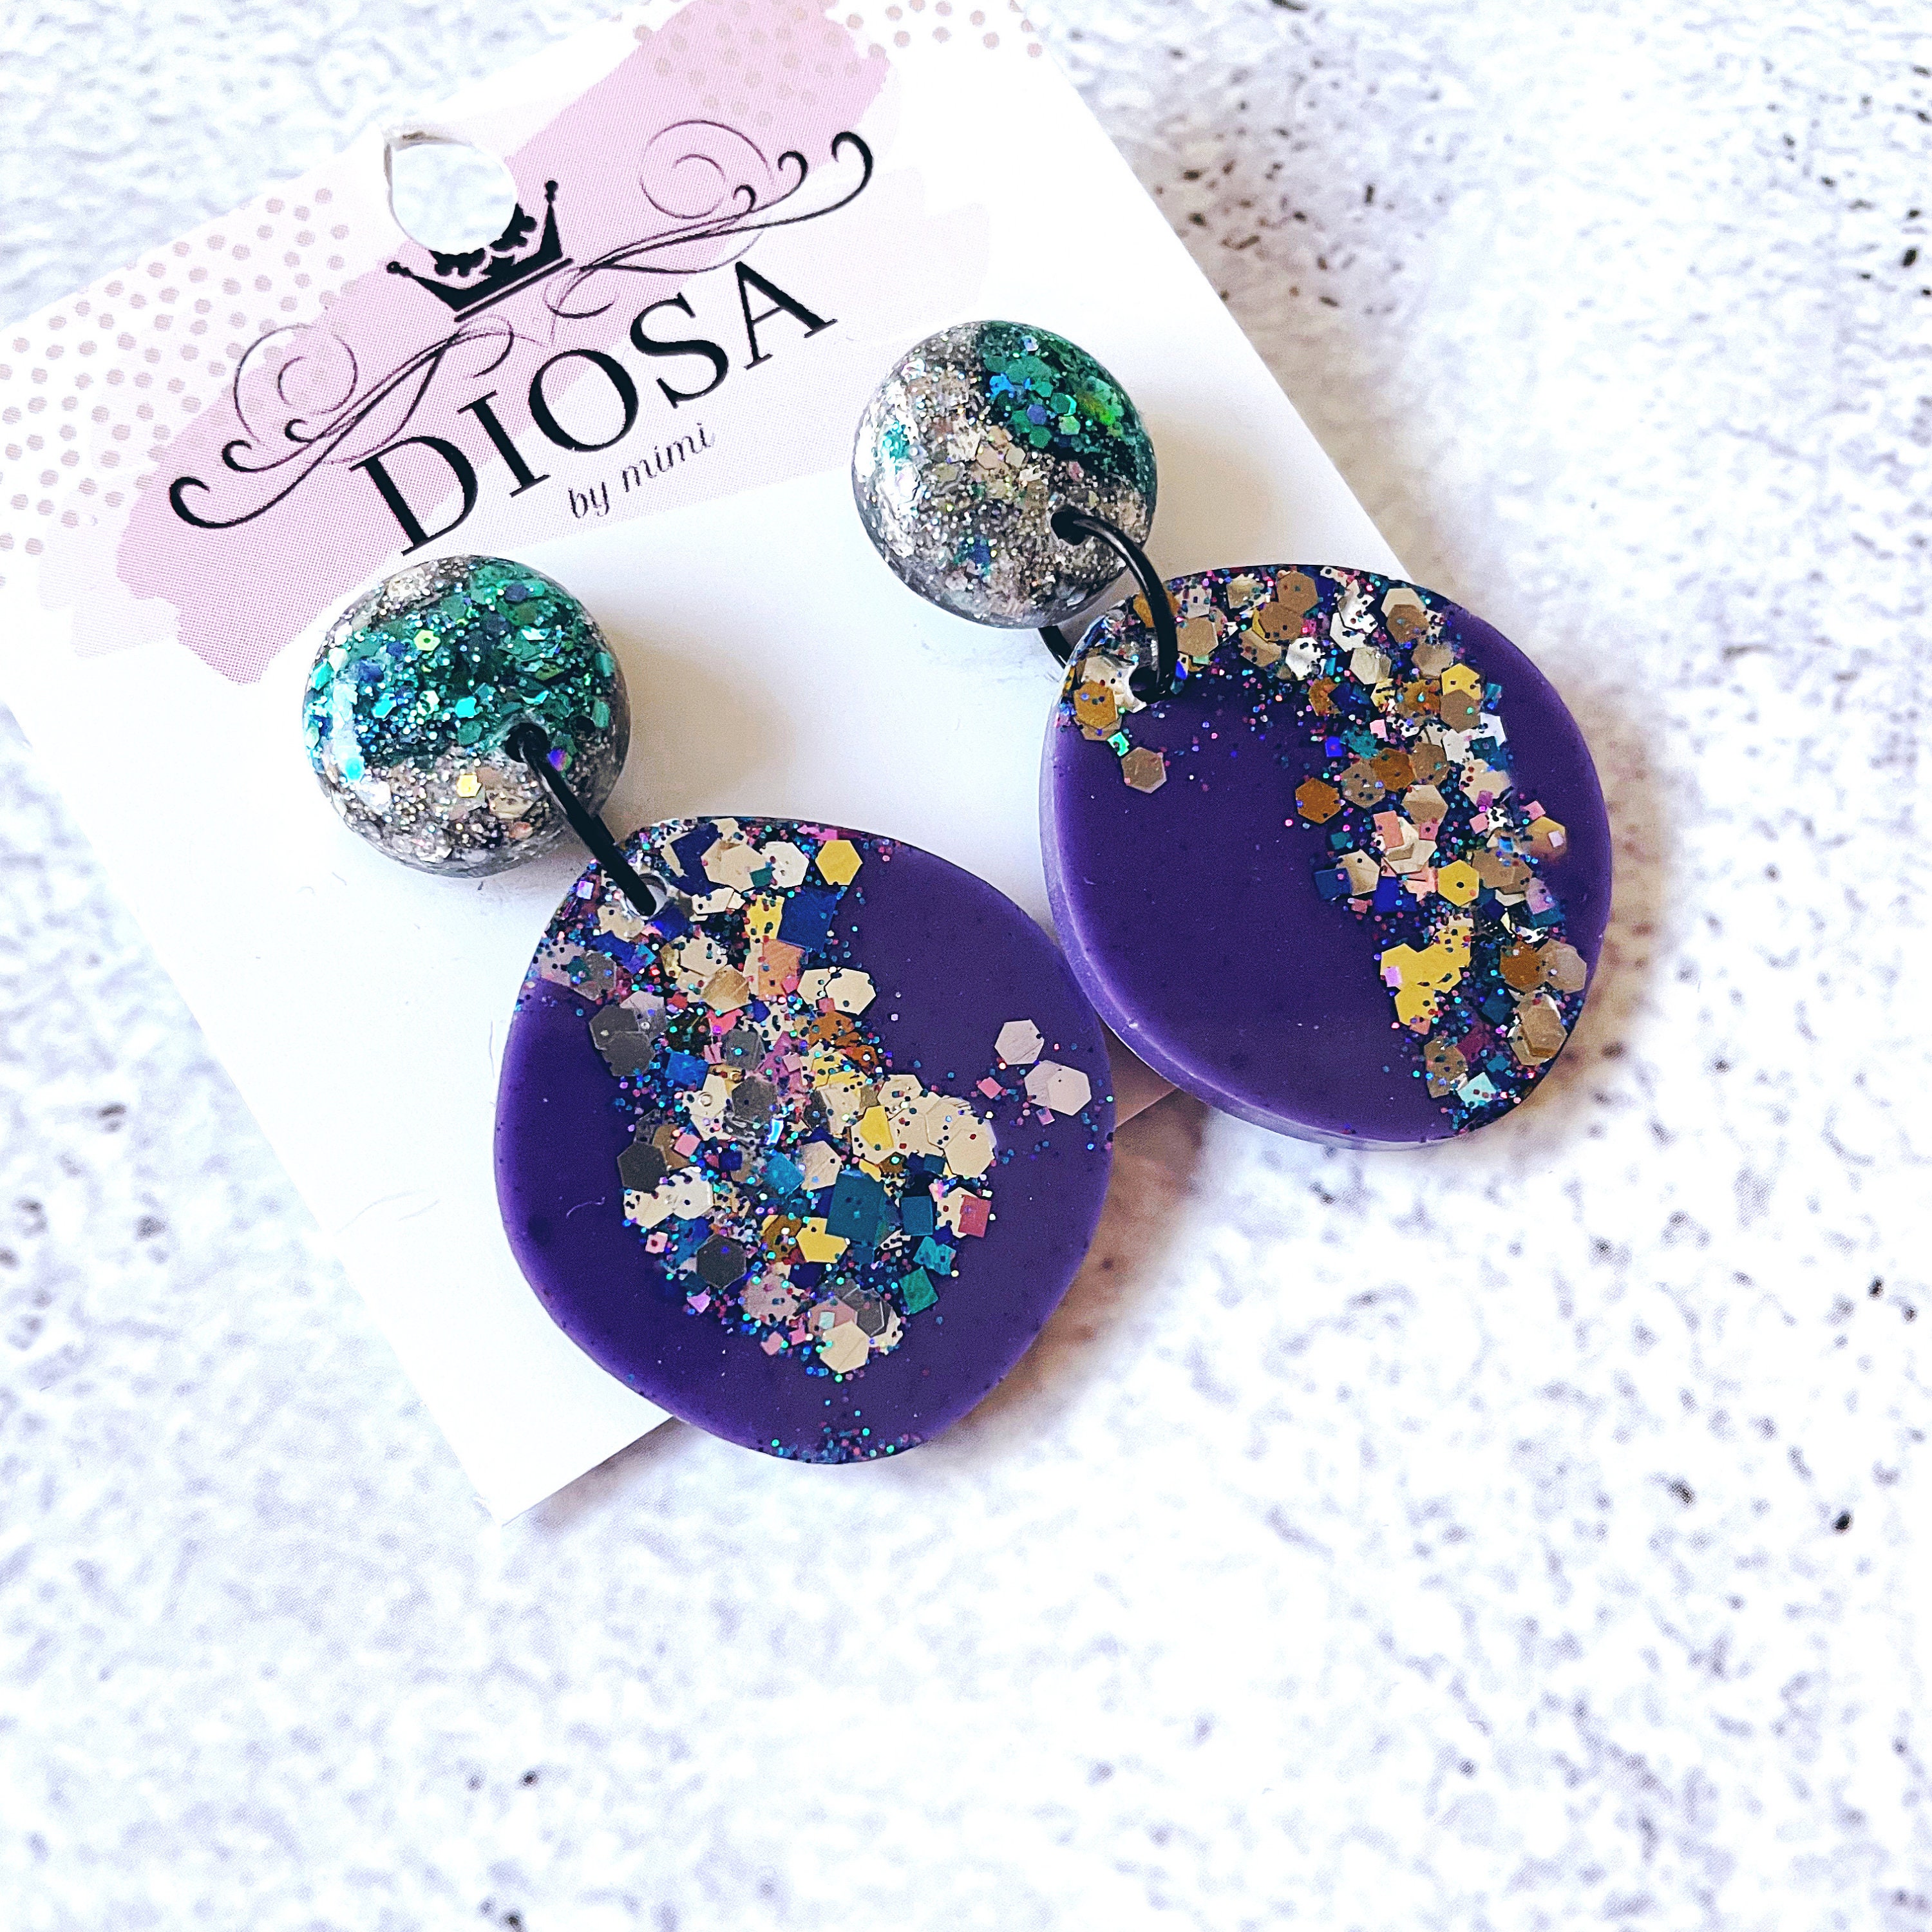 Hey Polly - Acrylic Statement Earrings Made in Australia